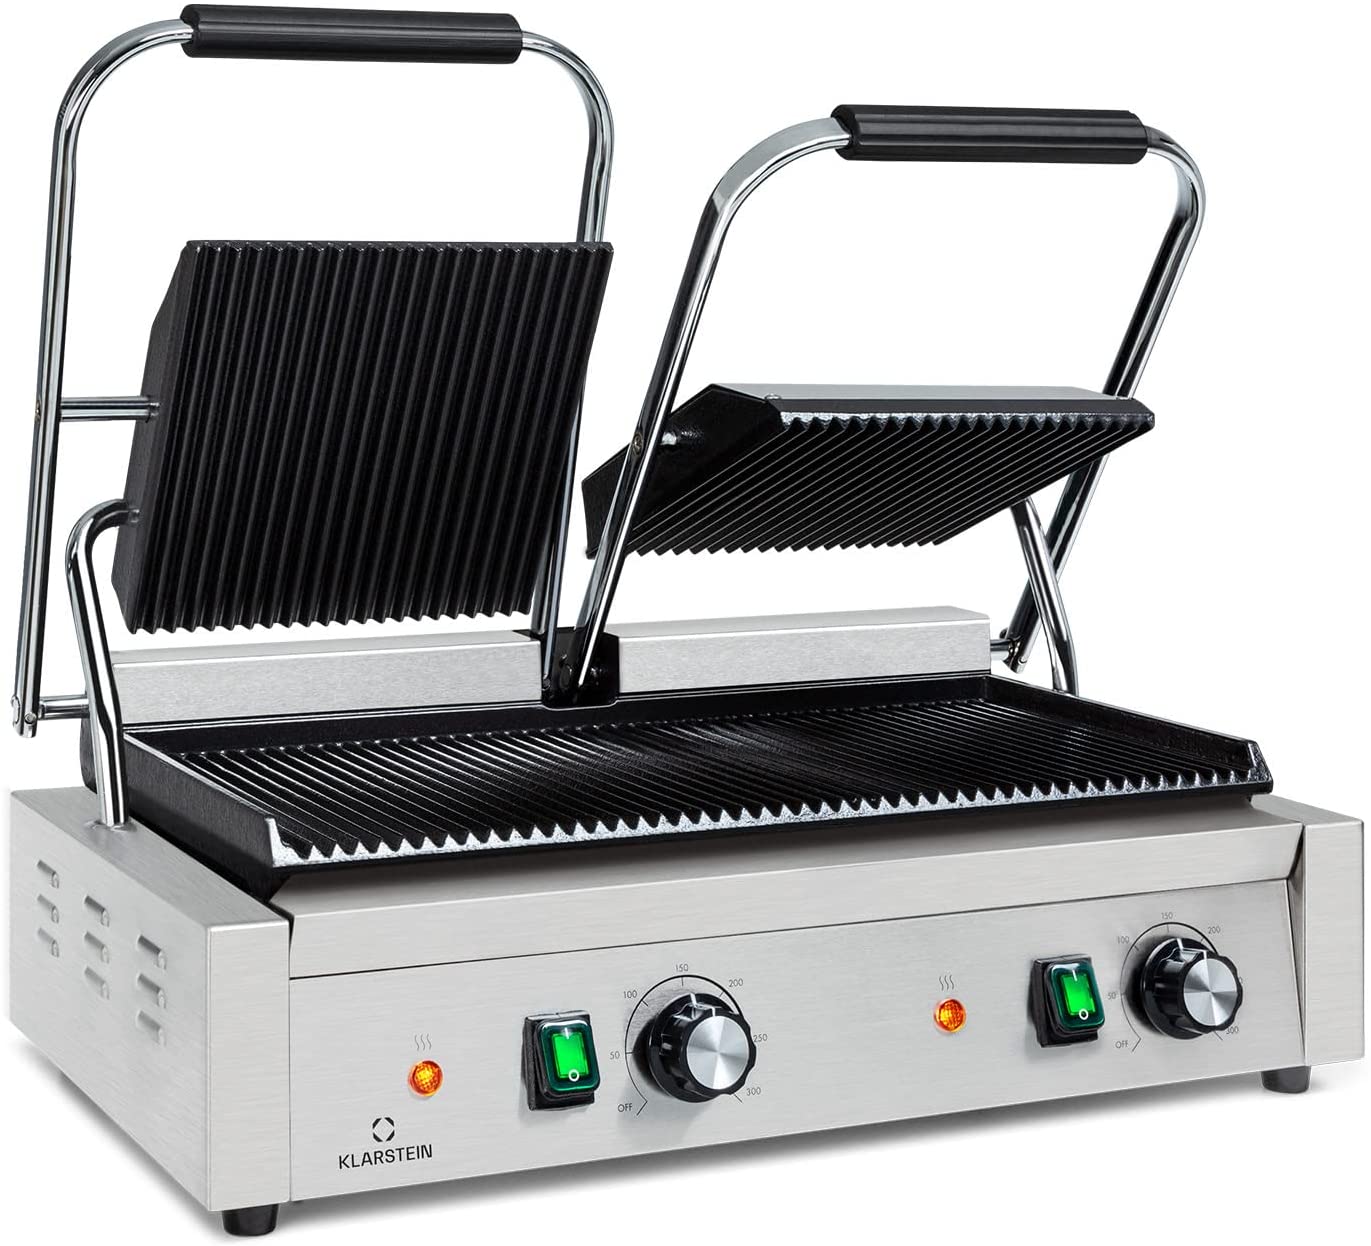 Klarstein Grillexpress Paninimaker Contact Grill - 2 x 1800 W Stainless Steel Cast Iron LED Indicator, 50 - 300 °C, 8 mm Thick Grill Surface, Metallic, Brushed Stainless Steel, Ribbed Surface